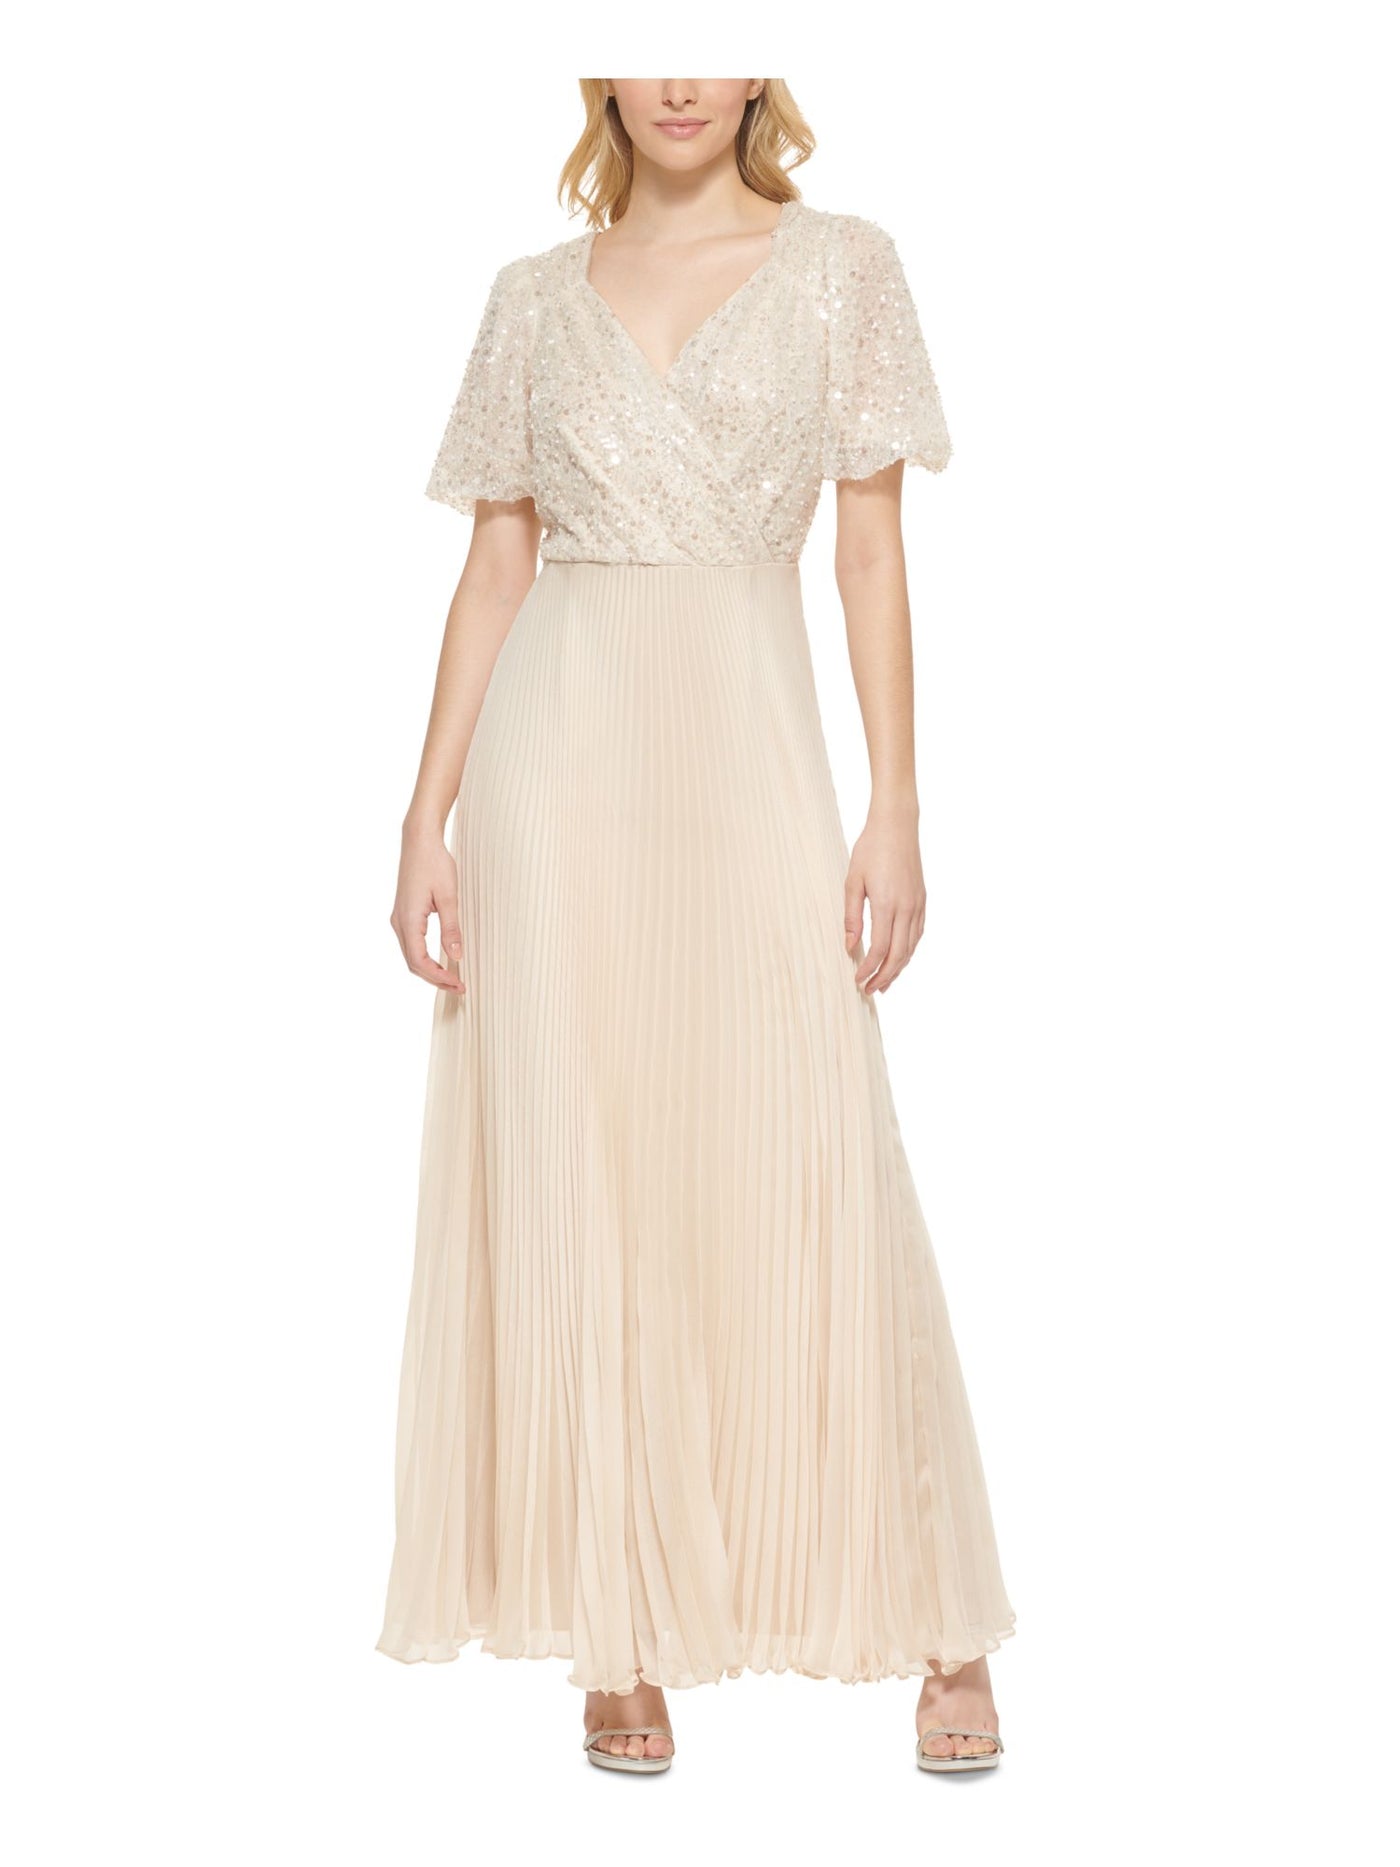 DKNY Womens Beige Embellished Zippered Pleated Lined Sheer Pouf Sleeve Surplice Neckline Full-Length Formal Gown Dress 14